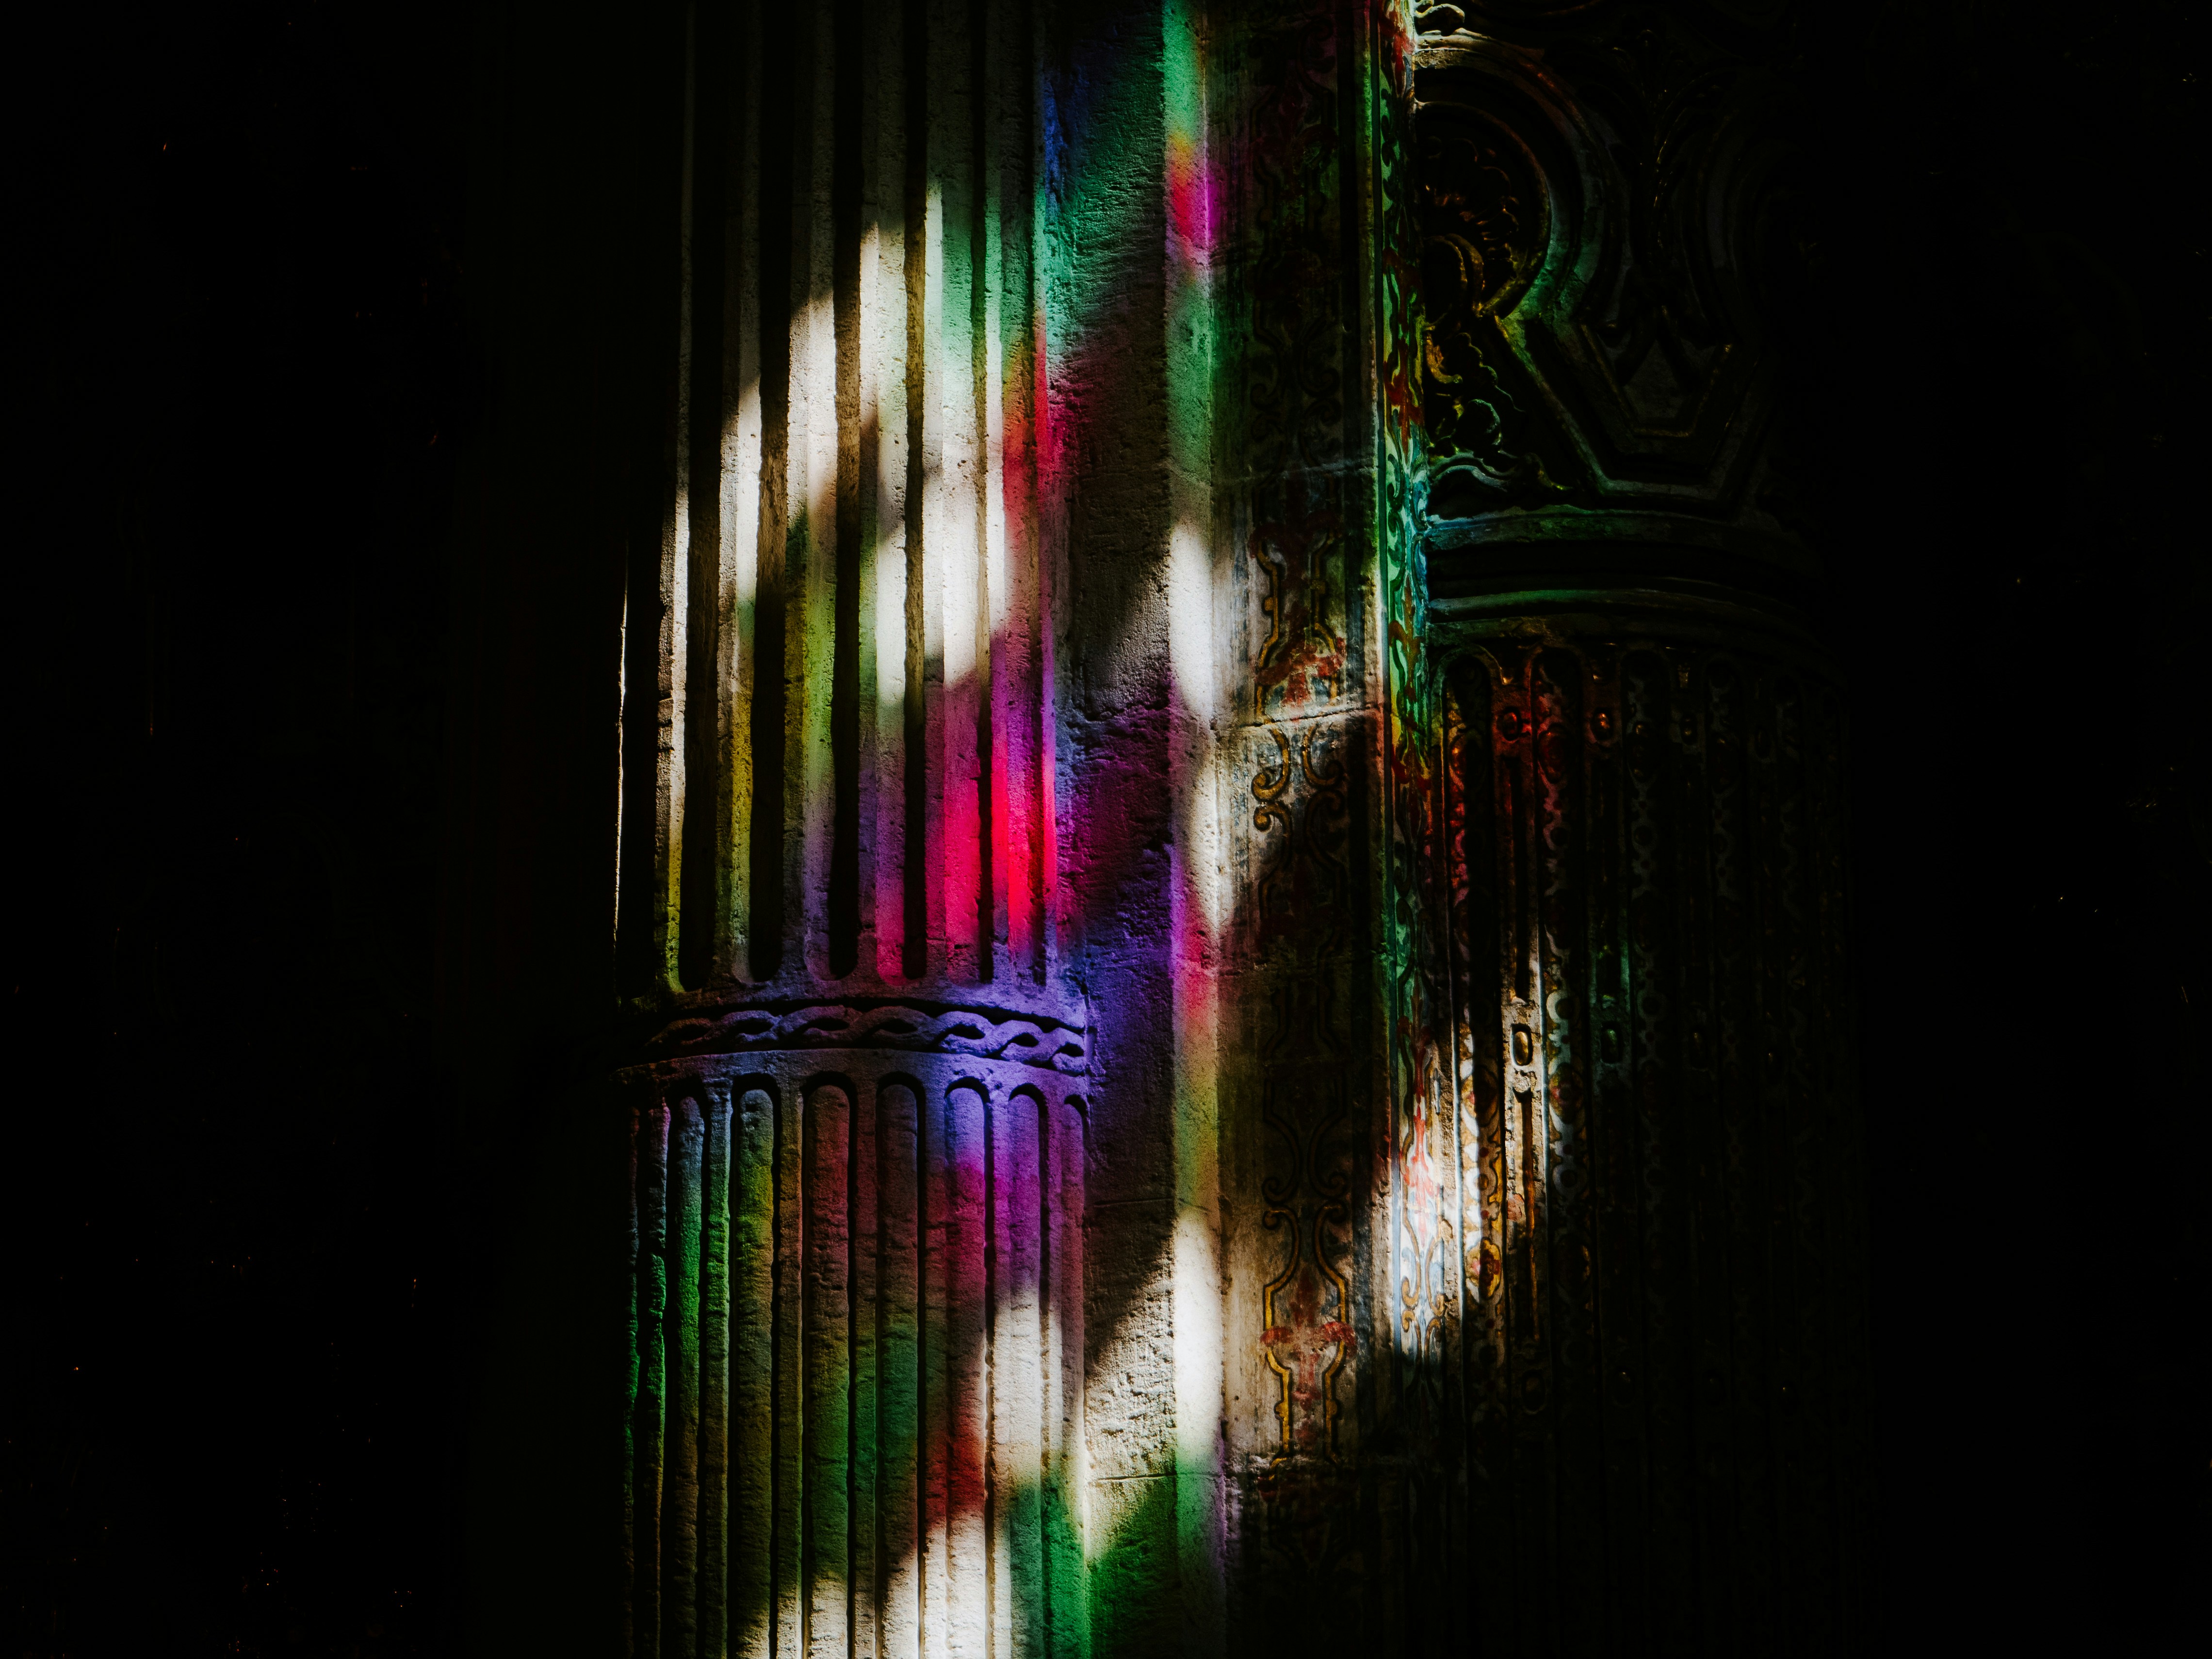 A cast of light through the stained glass of the dark Iglesia del Divino Salvador in Seville.